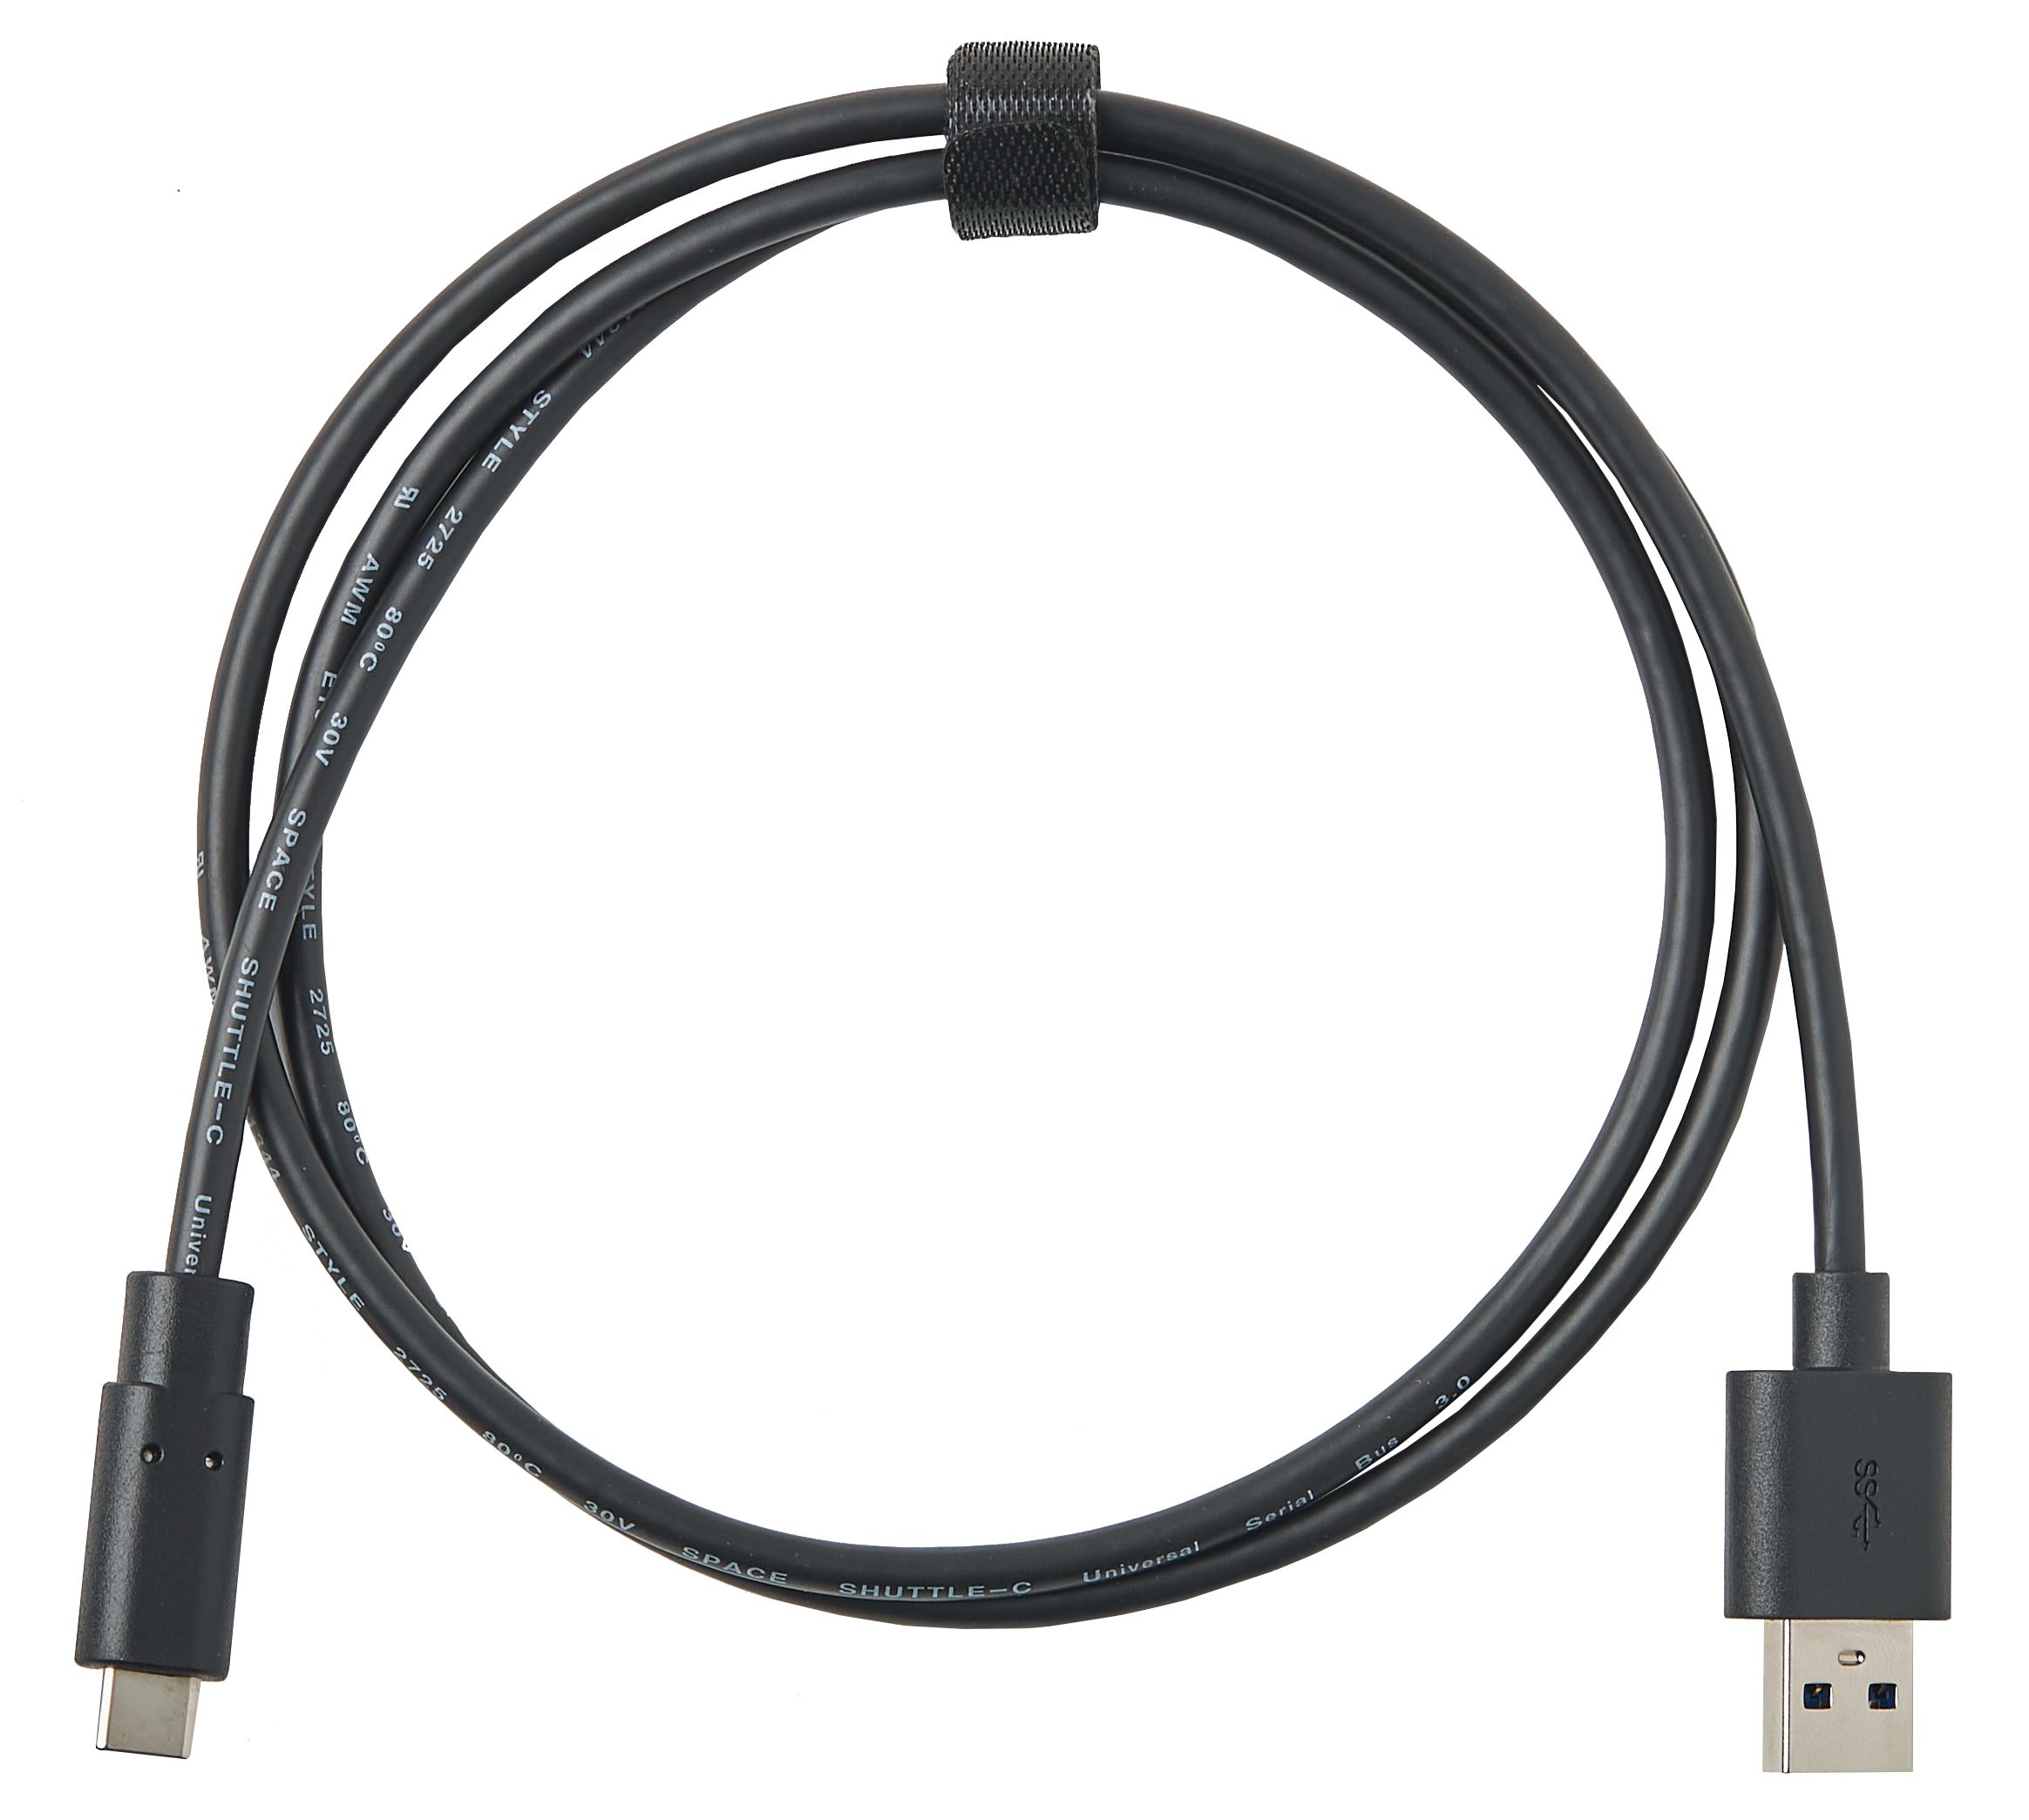 MEDIT USB A USB C CABLE FOR I700